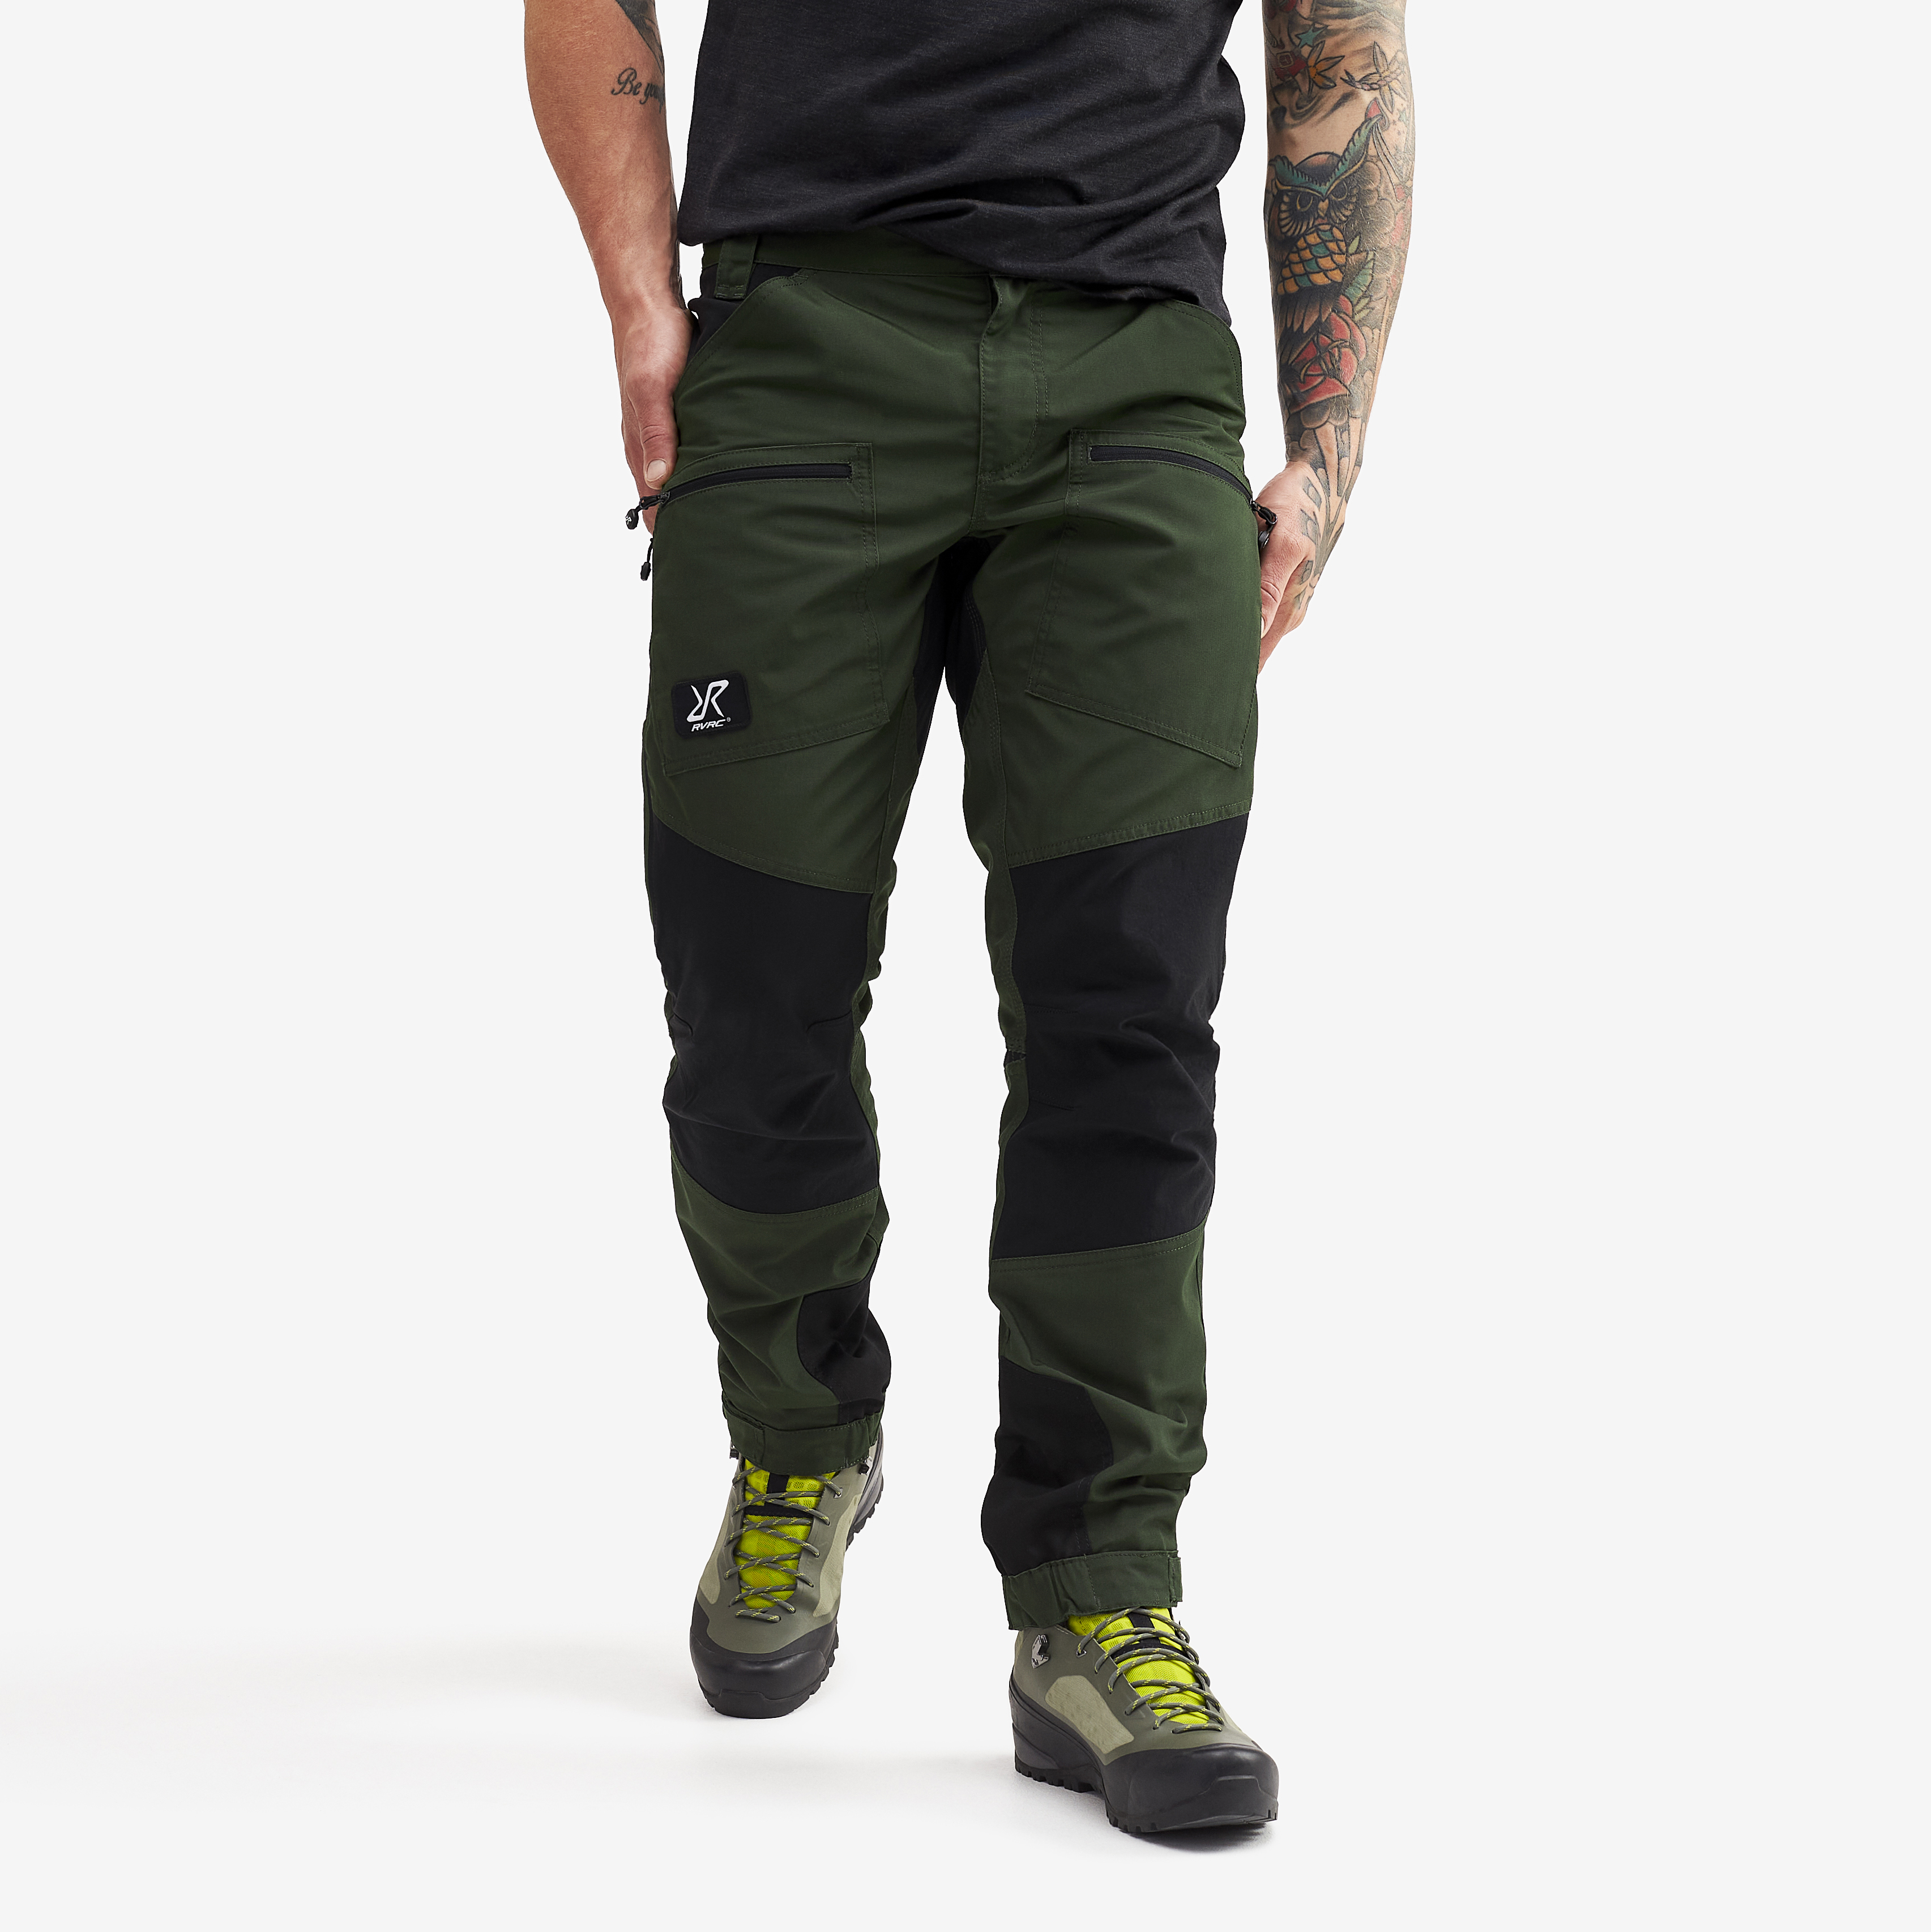 Nordwand Pro Short Pants Forest Green Hombres